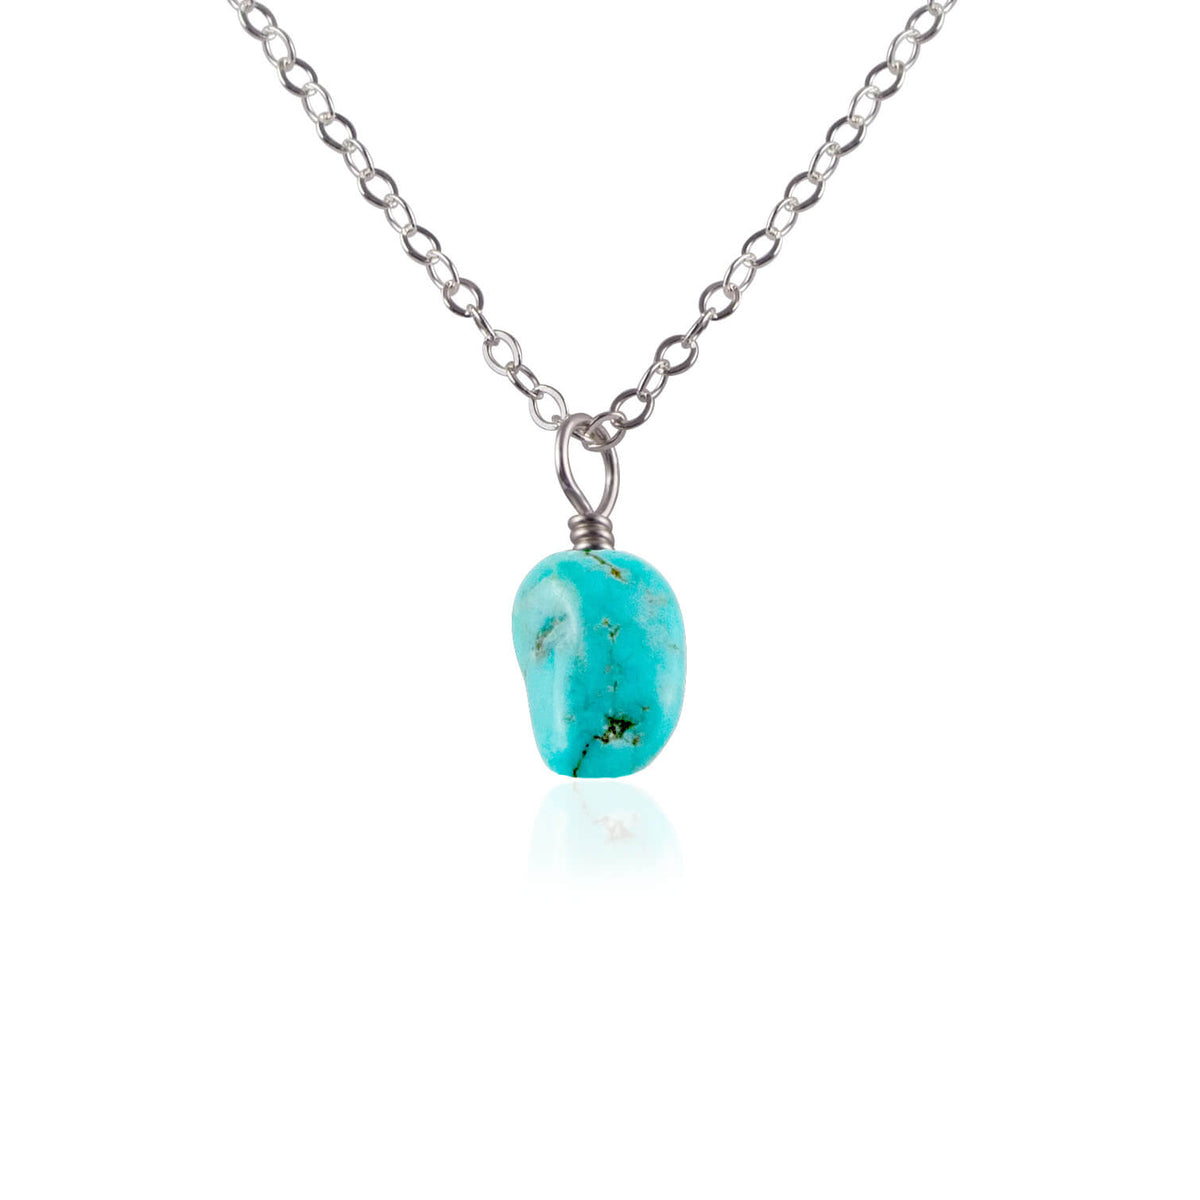 Raw Crystal Pendant Necklace - Turquoise - Stainless Steel - Luna Tide Handmade Jewellery